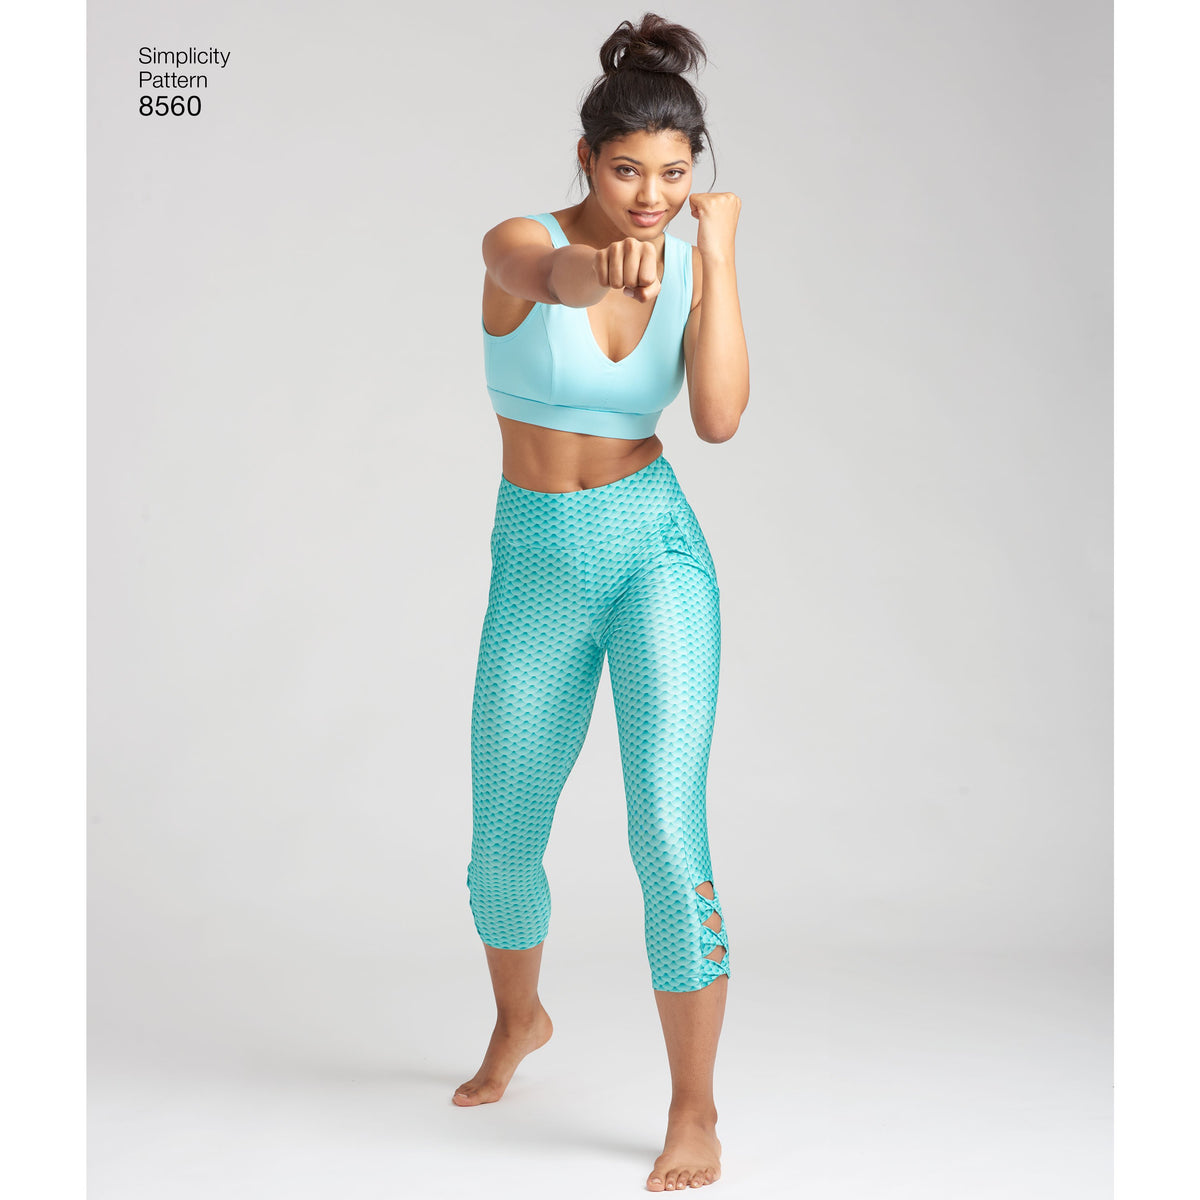 S9620, Misses' and Women's Knit Sports Bra, Leggings and Bike Shorts by  Madalynne Intimates